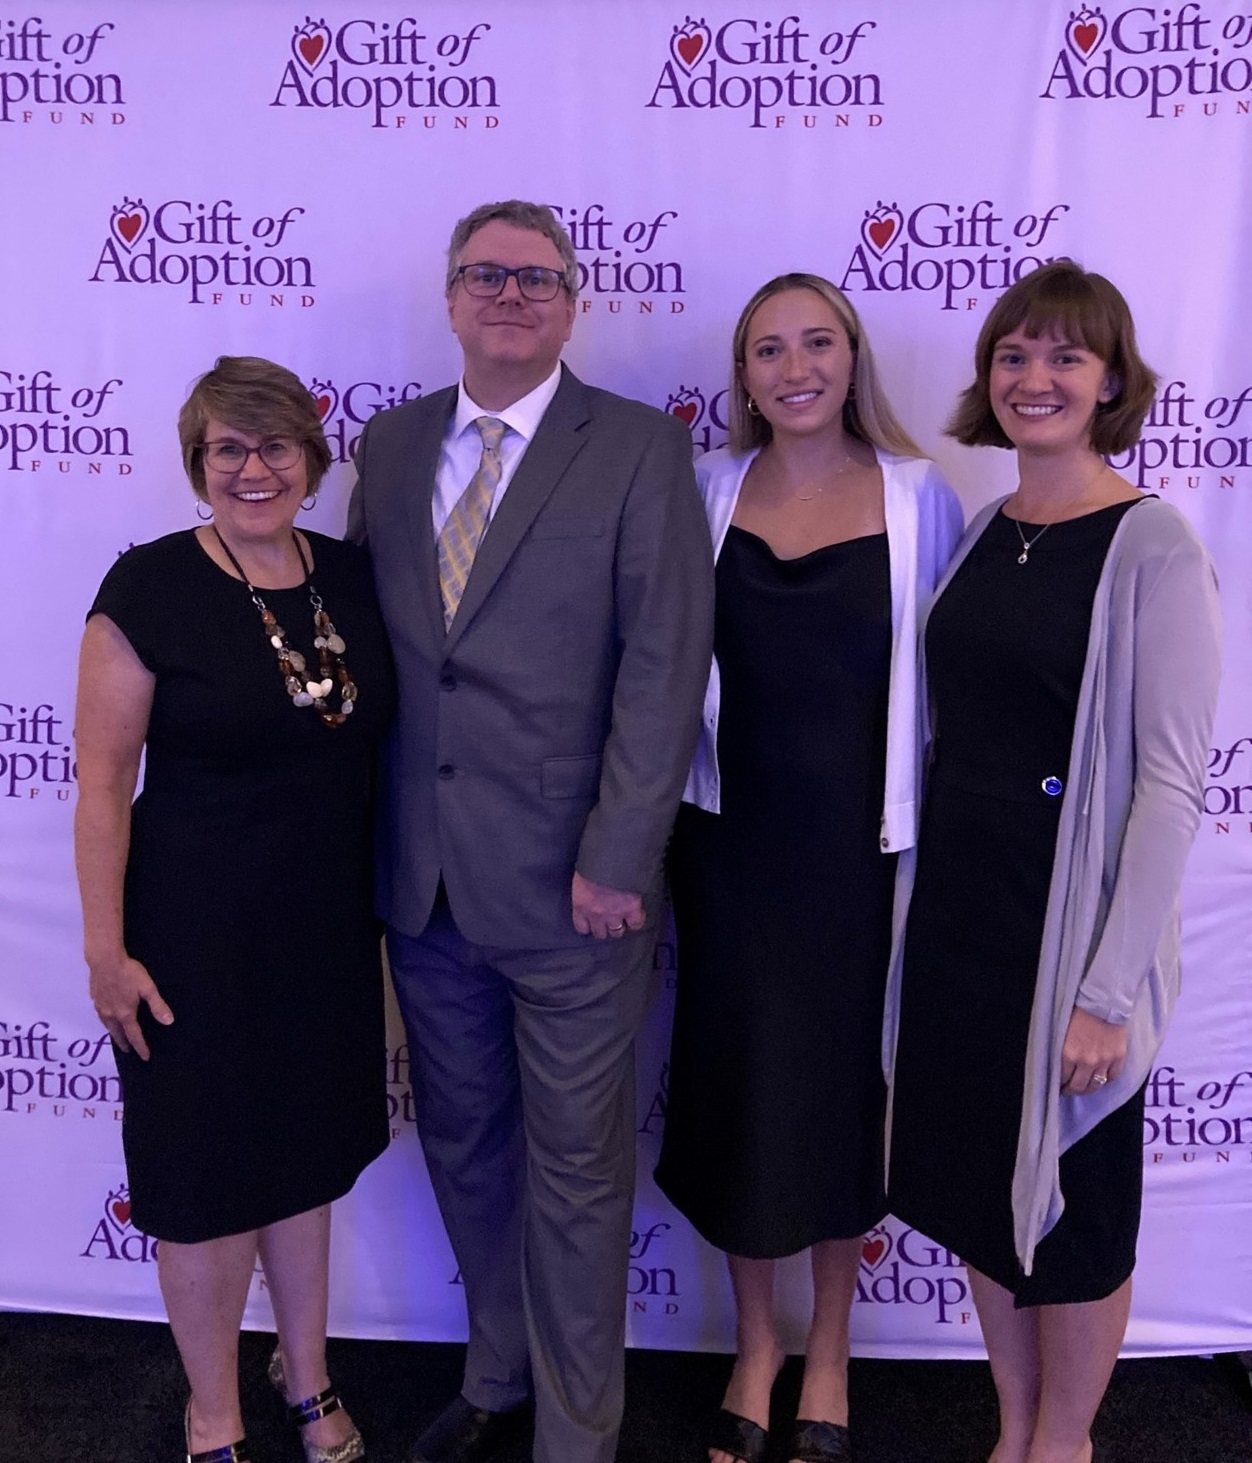 Anne Gross (Lead, Data Citizens with Purpose), Brian Murphy (COO, Gift of Adoption Fund), Elise Adreon (Advisory Associate), Rachel Gatto (Advisory Manager) meet for the first time at Gather for the Gift.